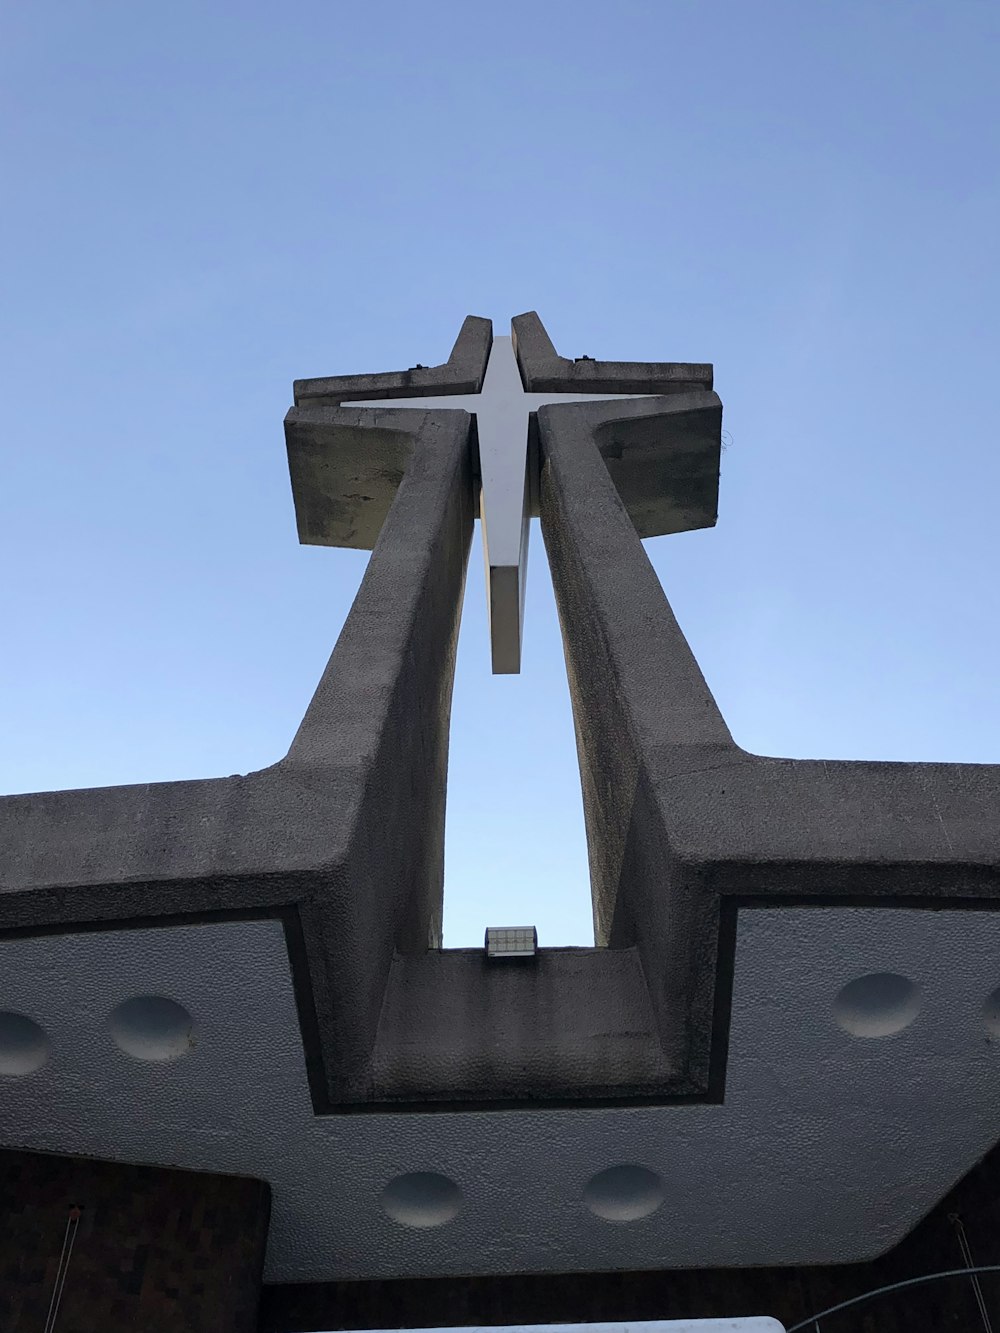 a large cross on top of a building